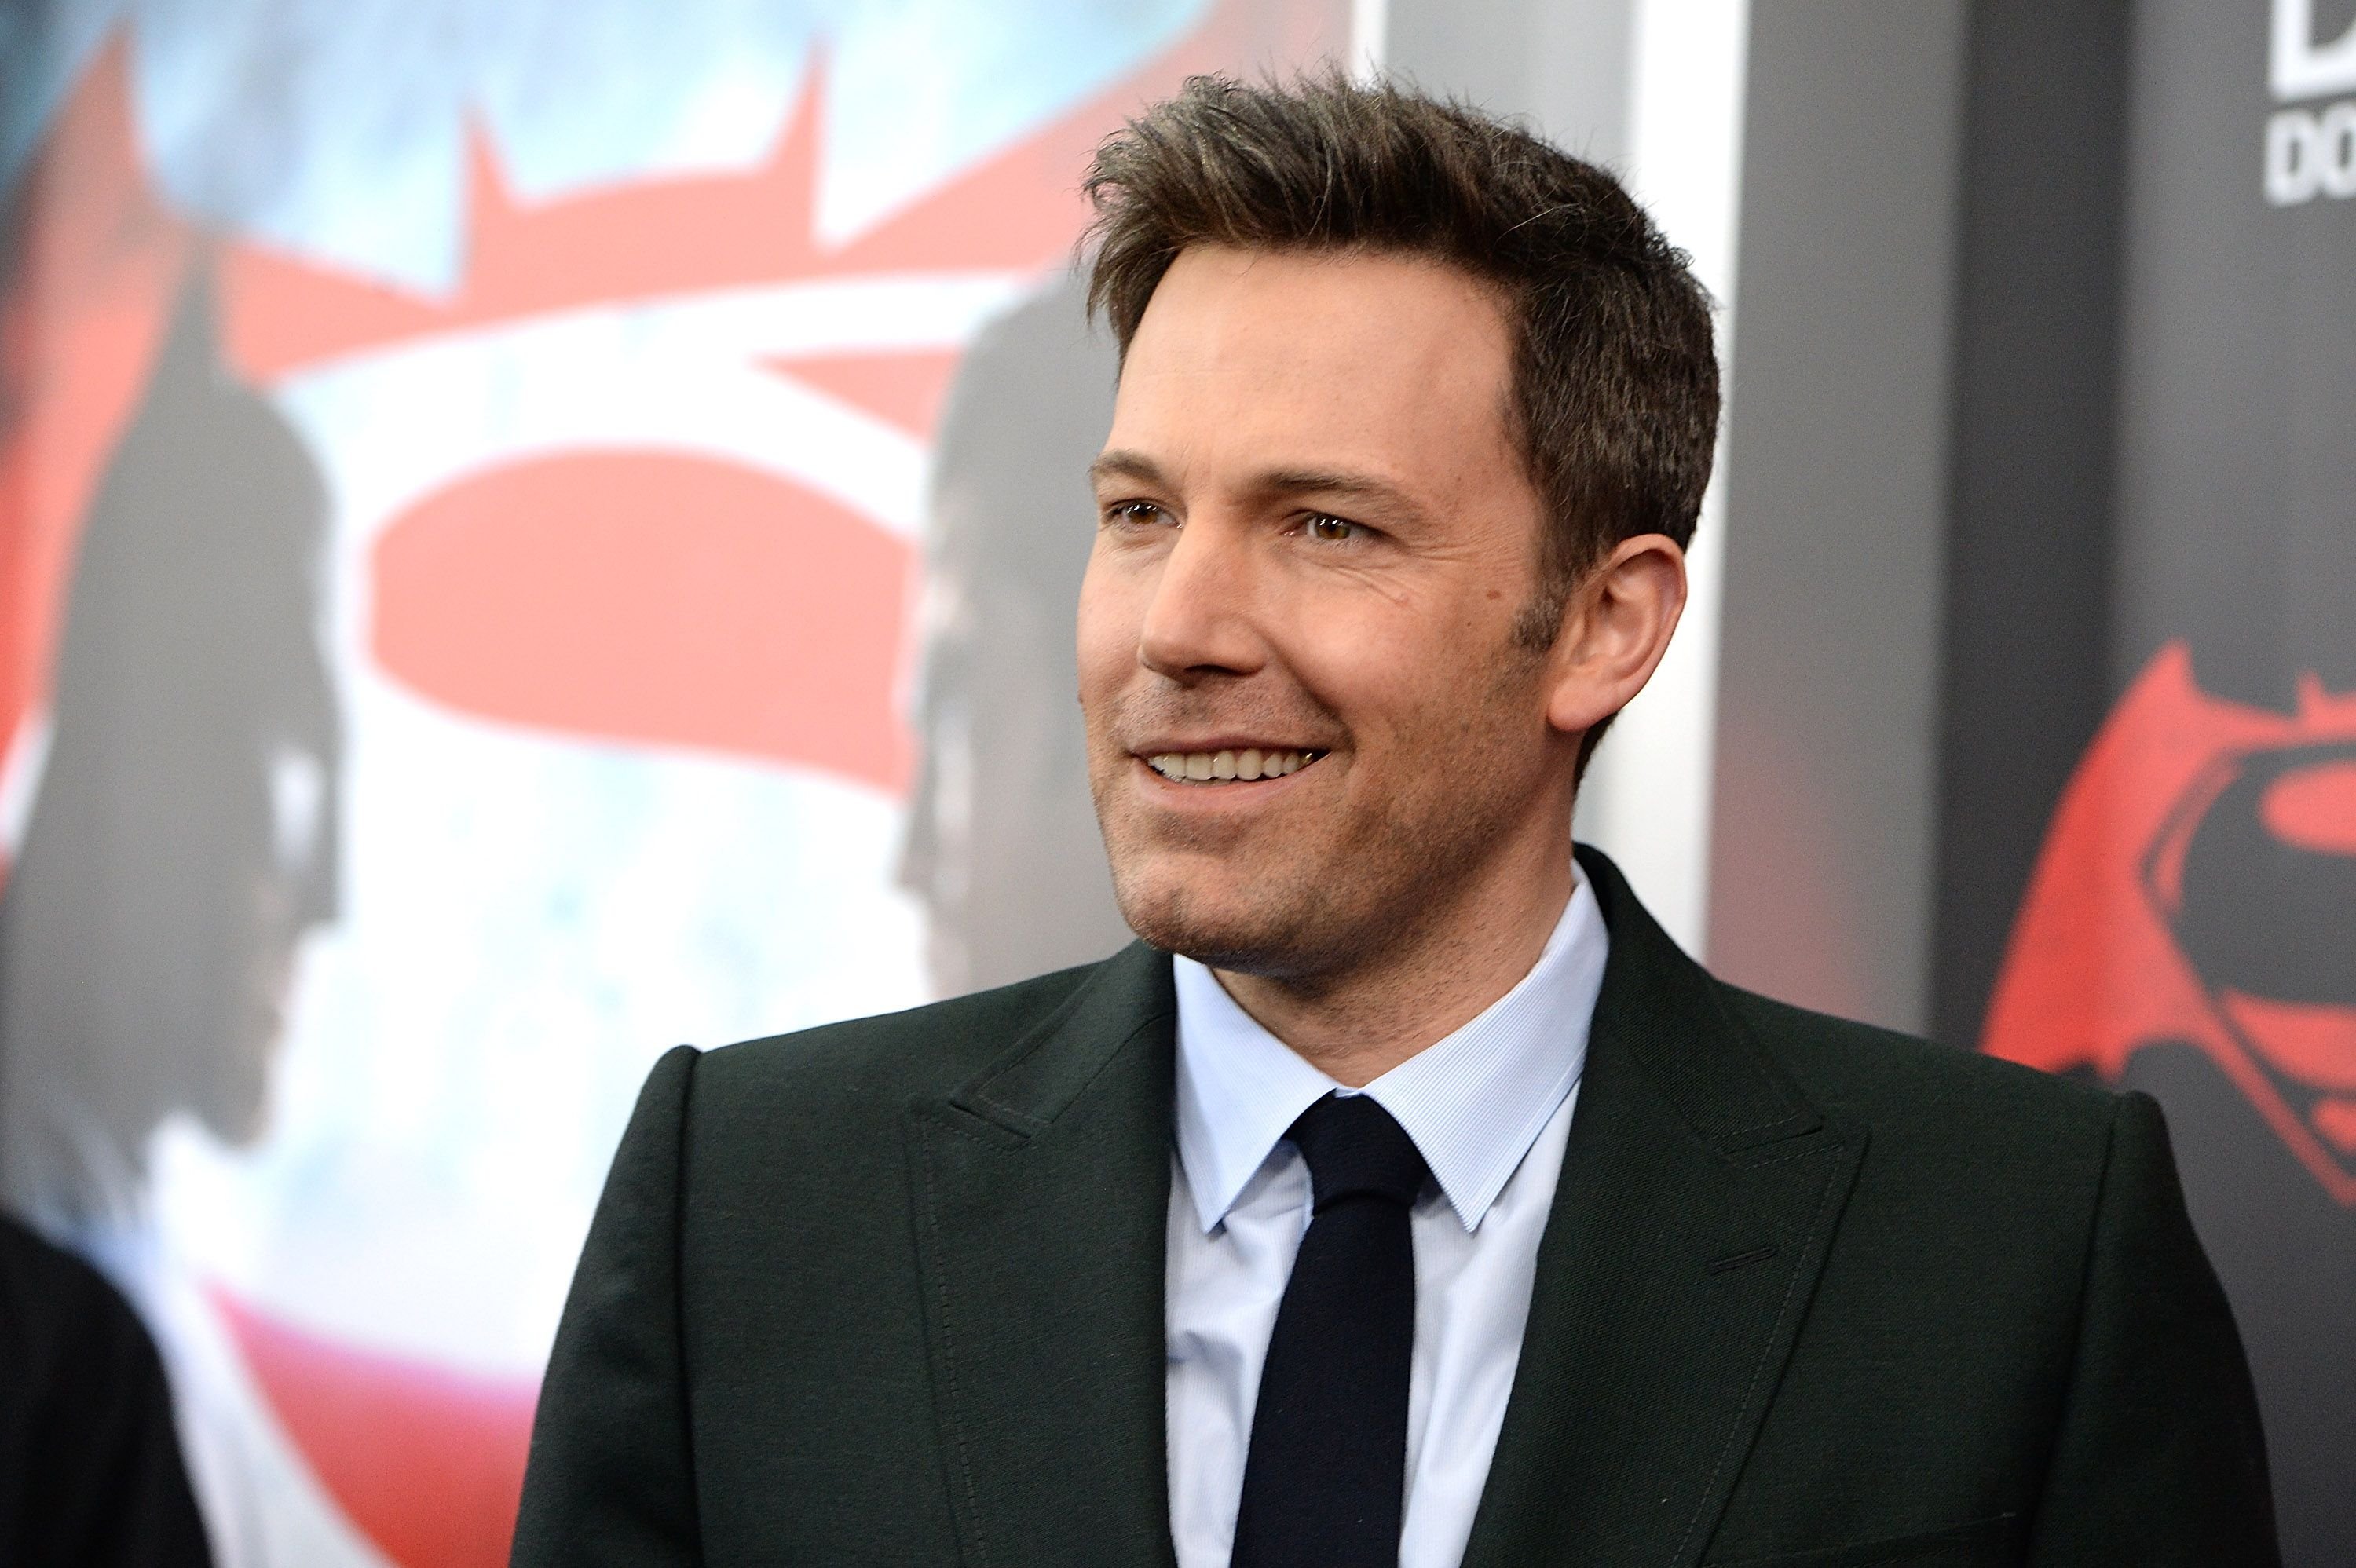  Ben Affleck at the premier of "Batman V Superman: Dawn Of Justice" in 2016 in New York City | Source: Getty Images